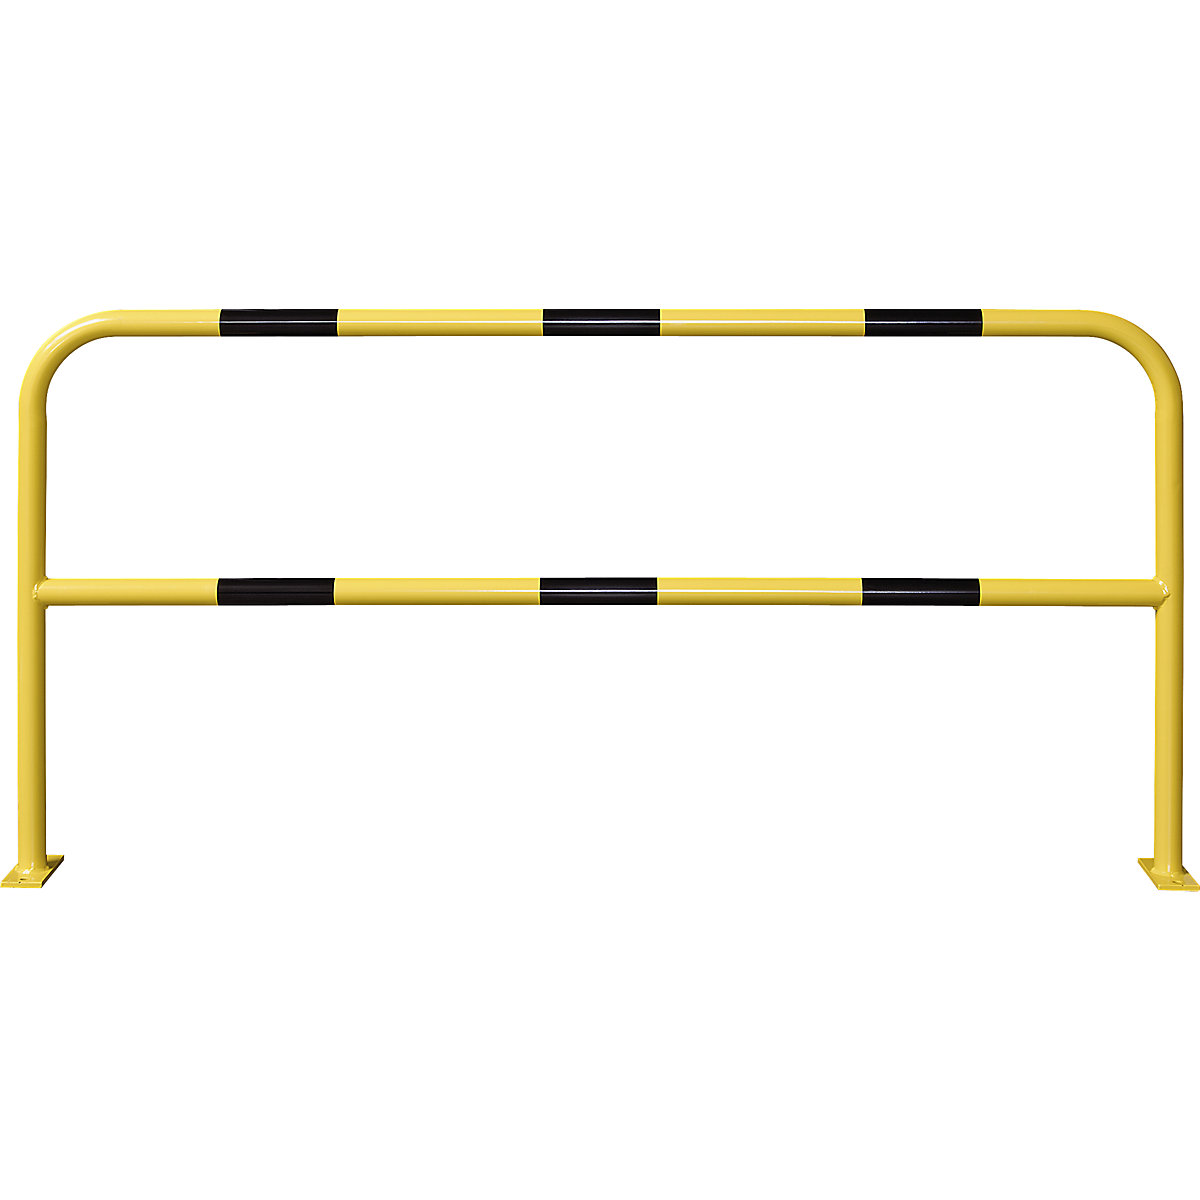 Crash protection bar, round tubing 48/2 mm, for bolting in place, width 2000 mm, zinc plated/coated-3